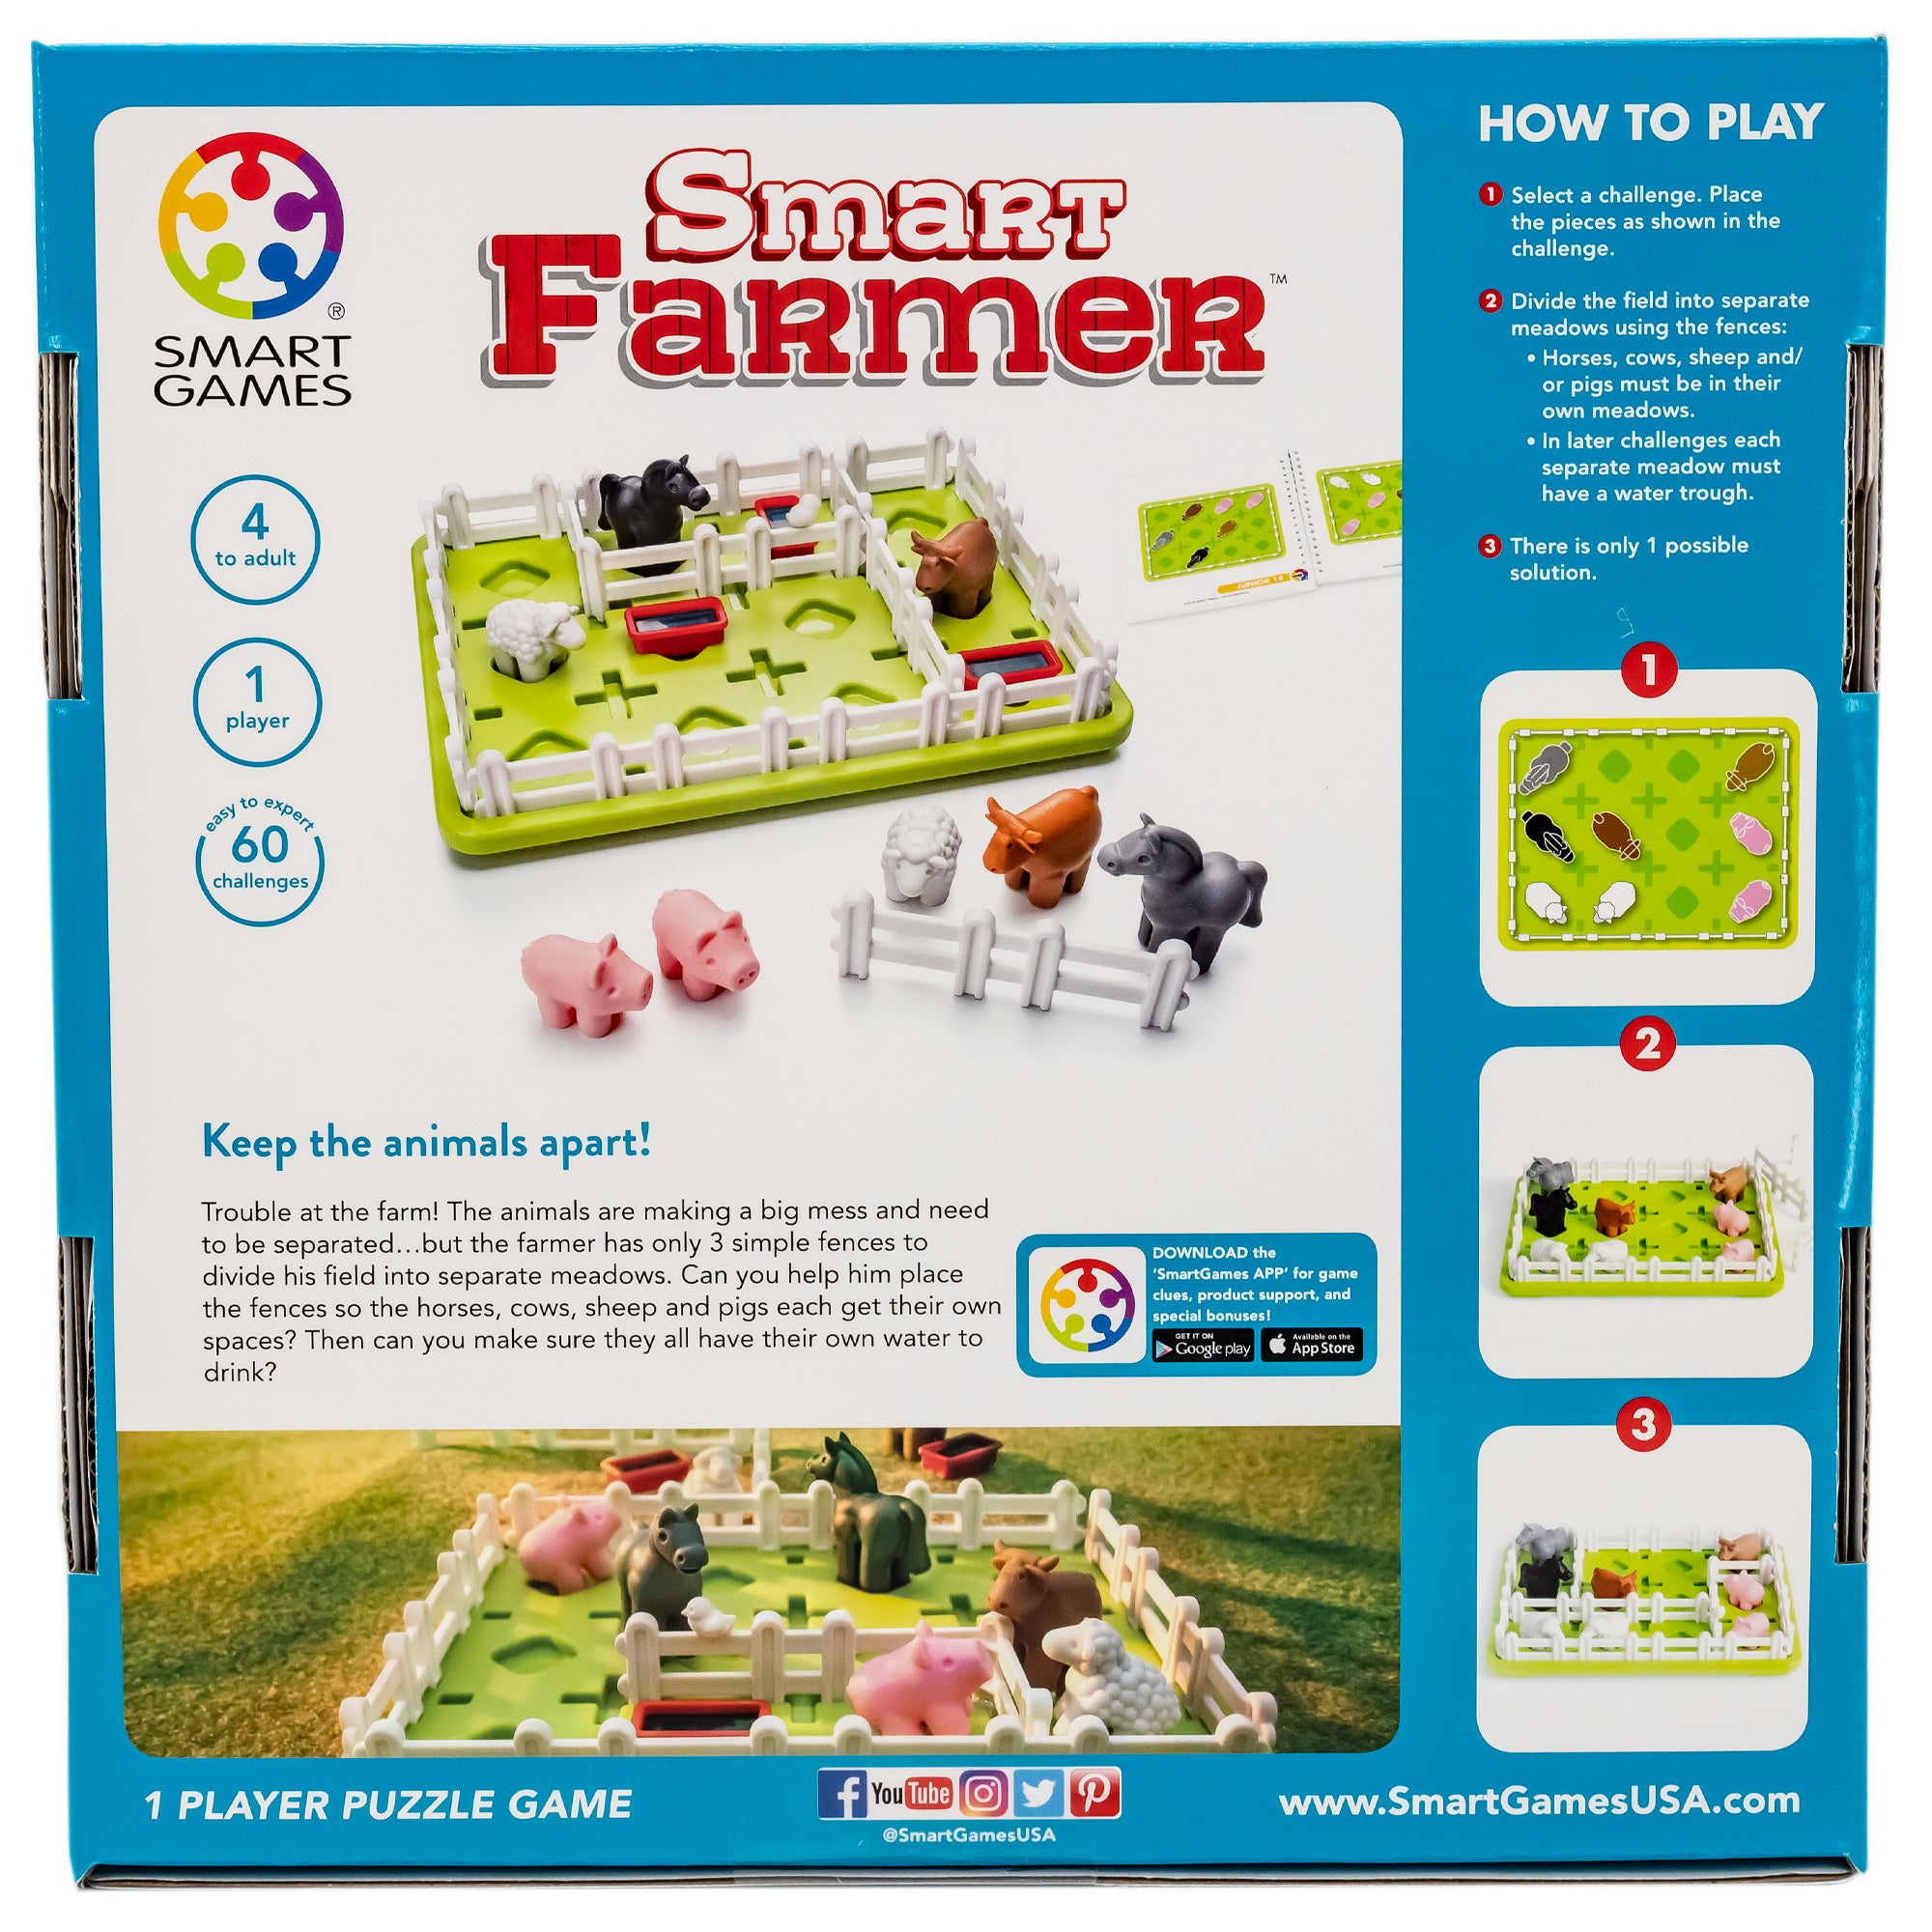 Smart Farmer game box back. The main photo shows the game components. The green rectangle-shaped game board has white fence pieces all around the edge and a few through the middle. You can see a horse, cow, sheep, feeding dishes inside the fence. Off to the side are a horse, cow, sheep, fence piece, and 2 pigs. Off to the right is the instruction booklet open to show challenges. Below is another picture of the game setup on grass. On the right are 3 images showing how to play the game.